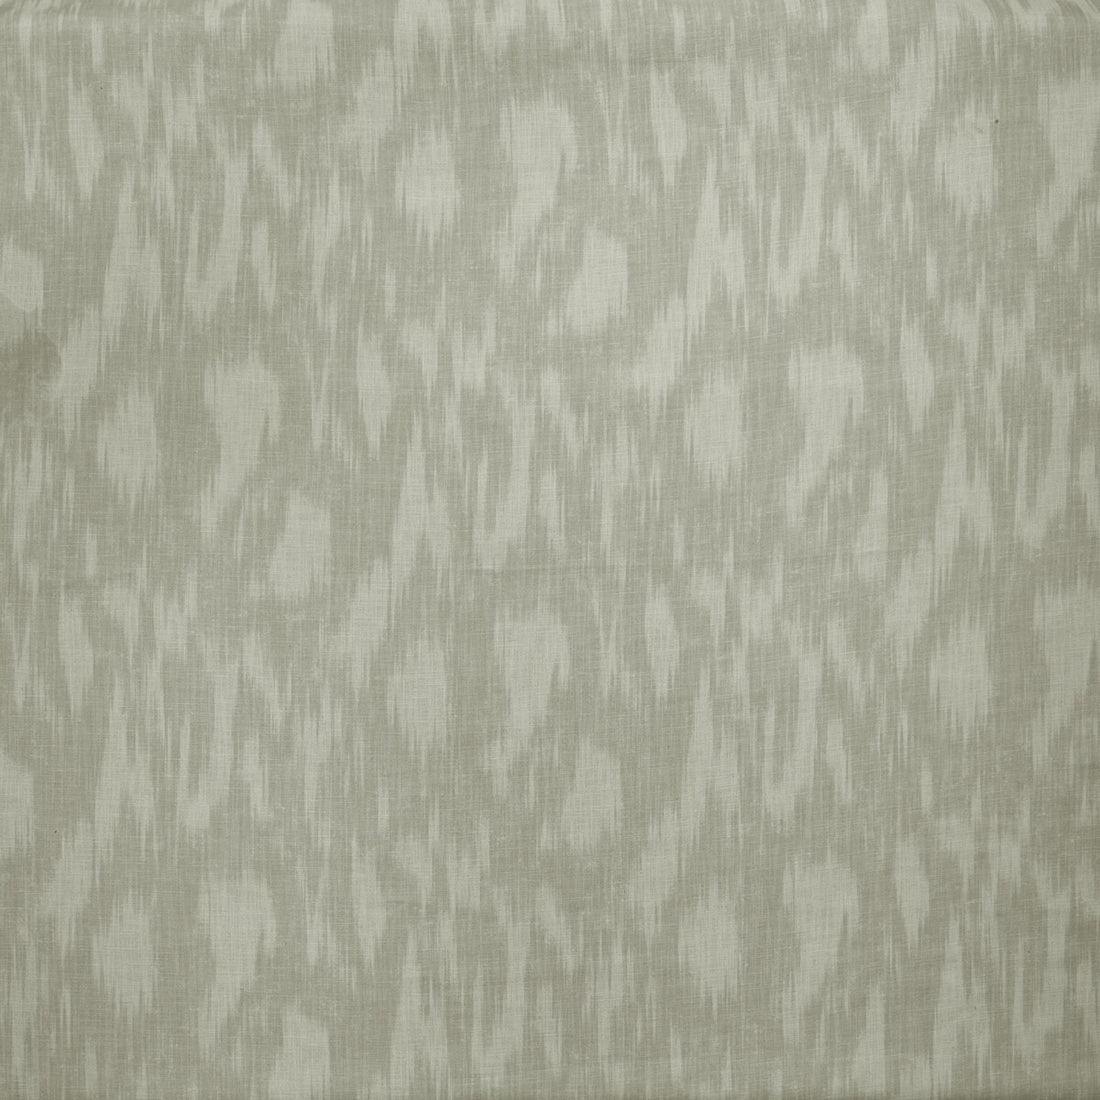 Apulia fabric in canvas color - pattern AM100324.1.0 - by Kravet Couture in the Andrew Martin Salento collection